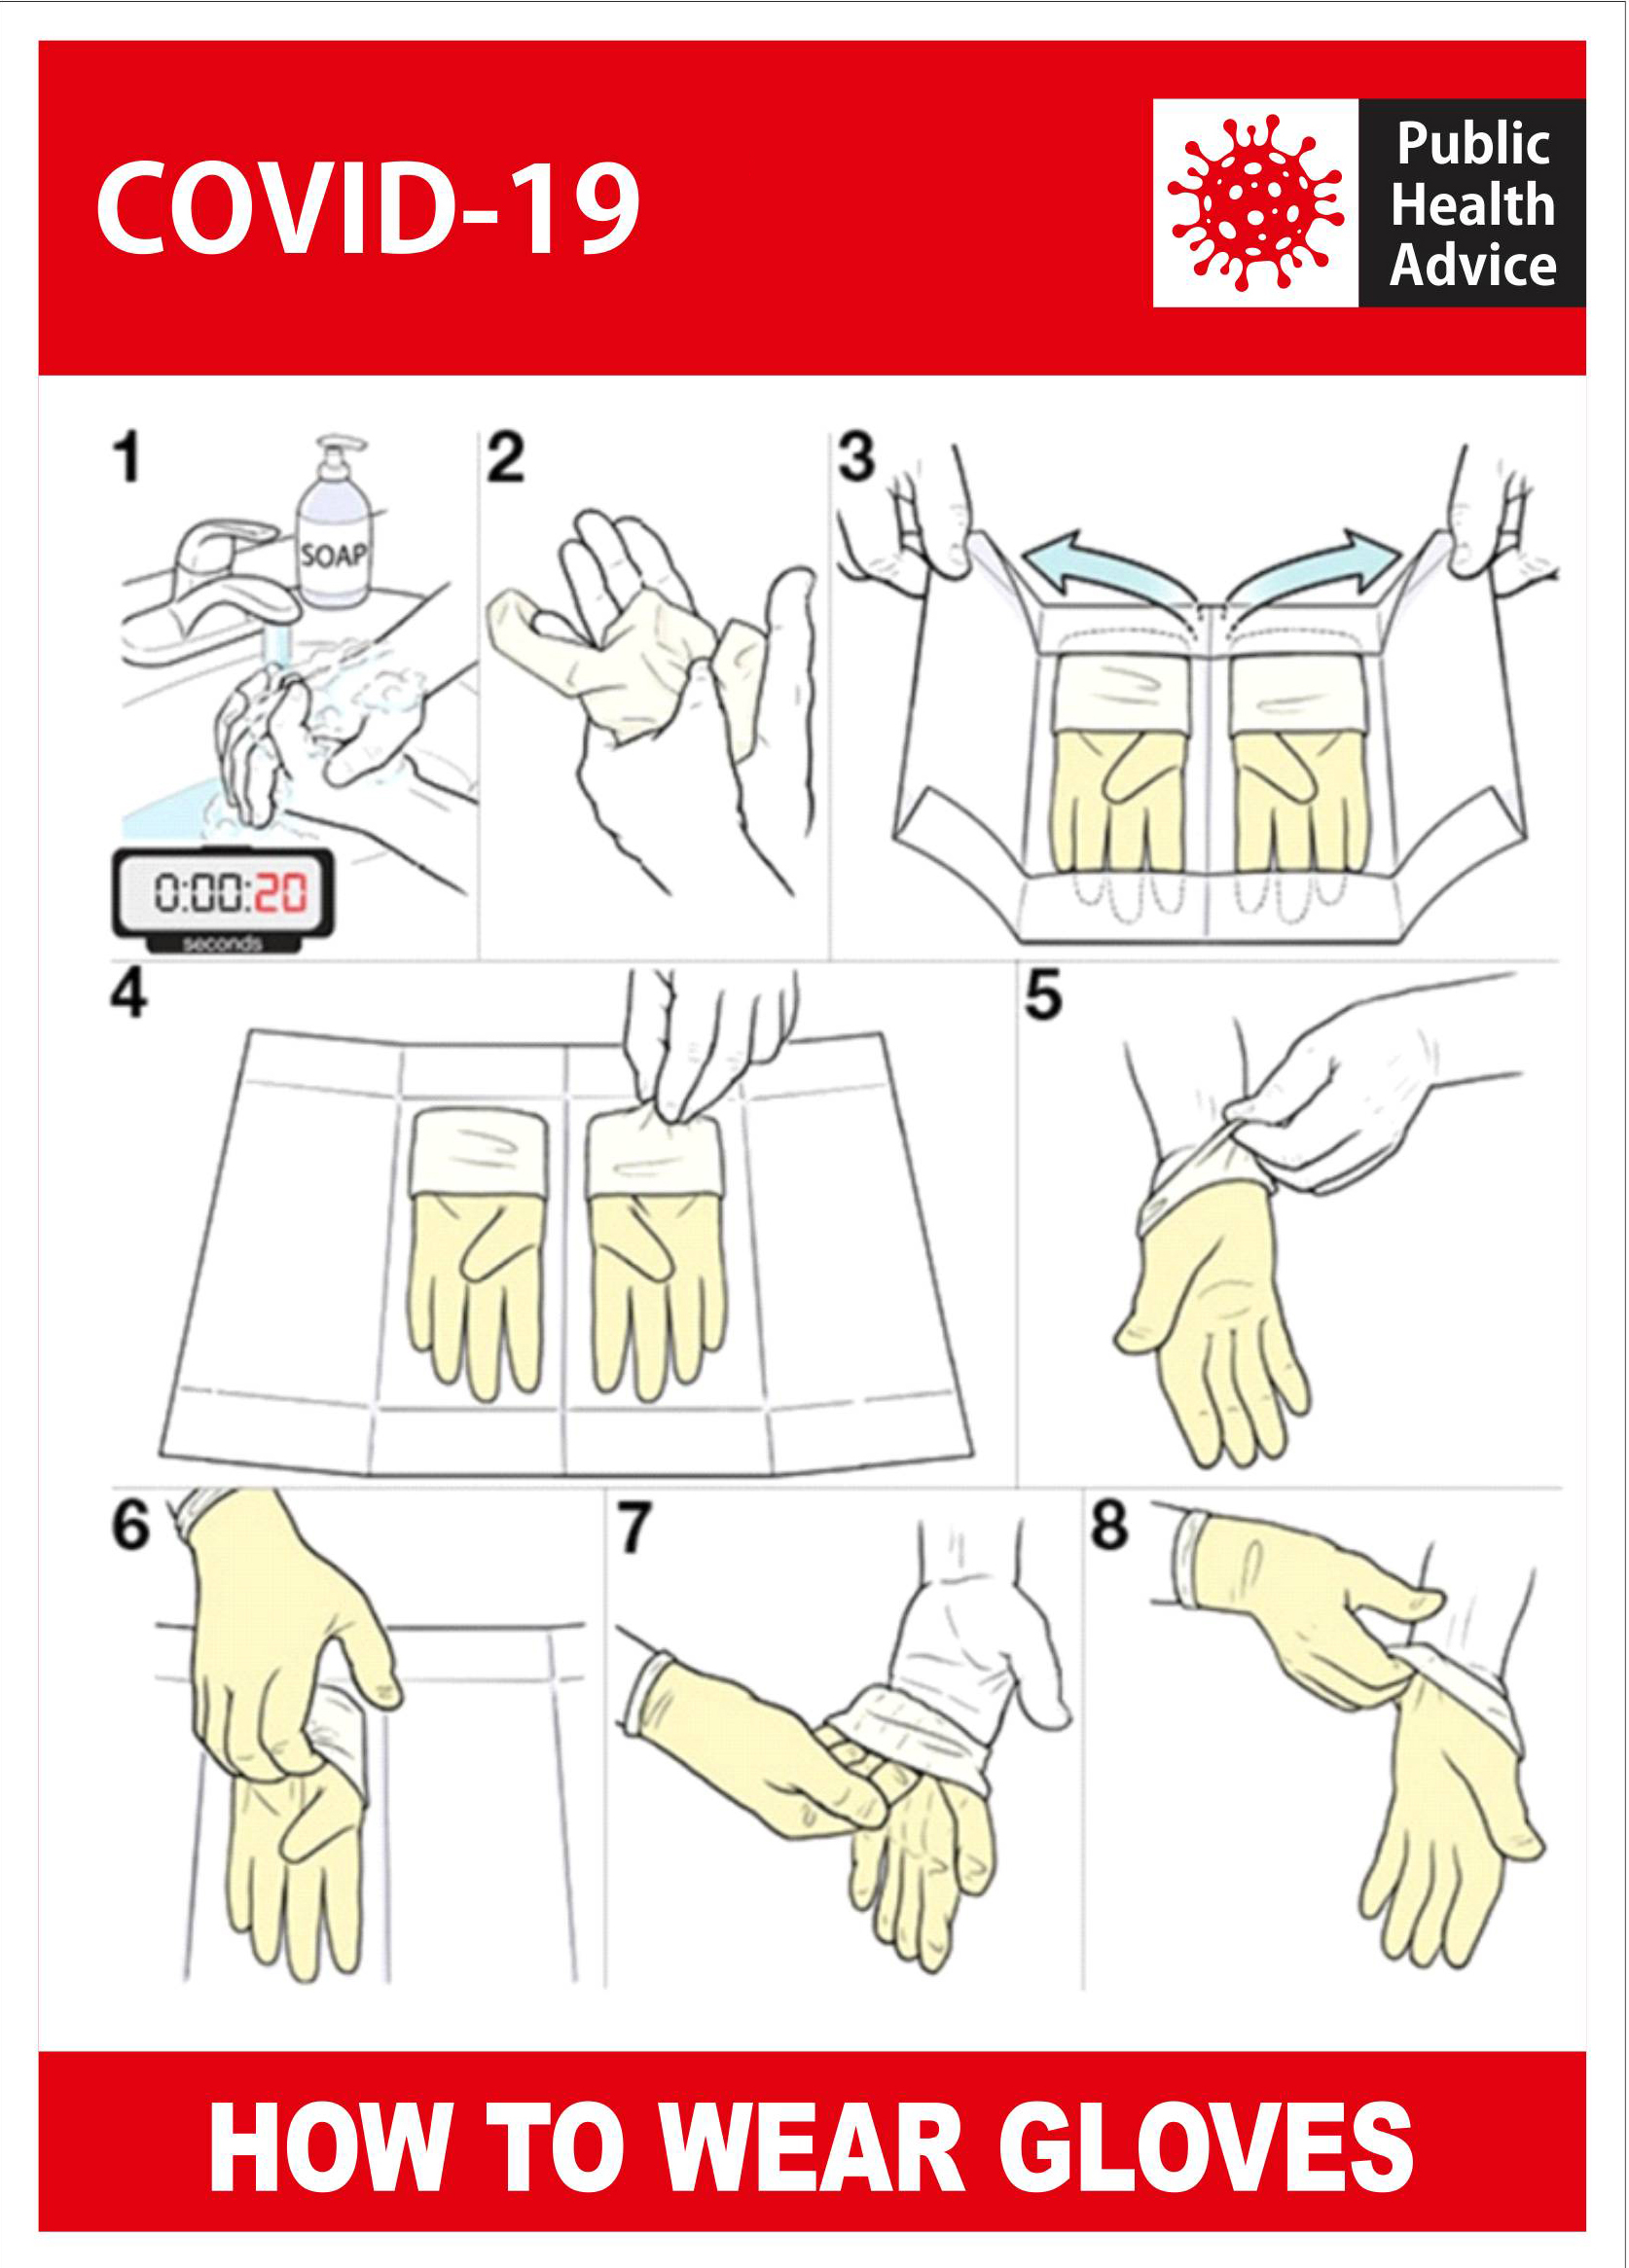 HOW TO WEAR GLOVES